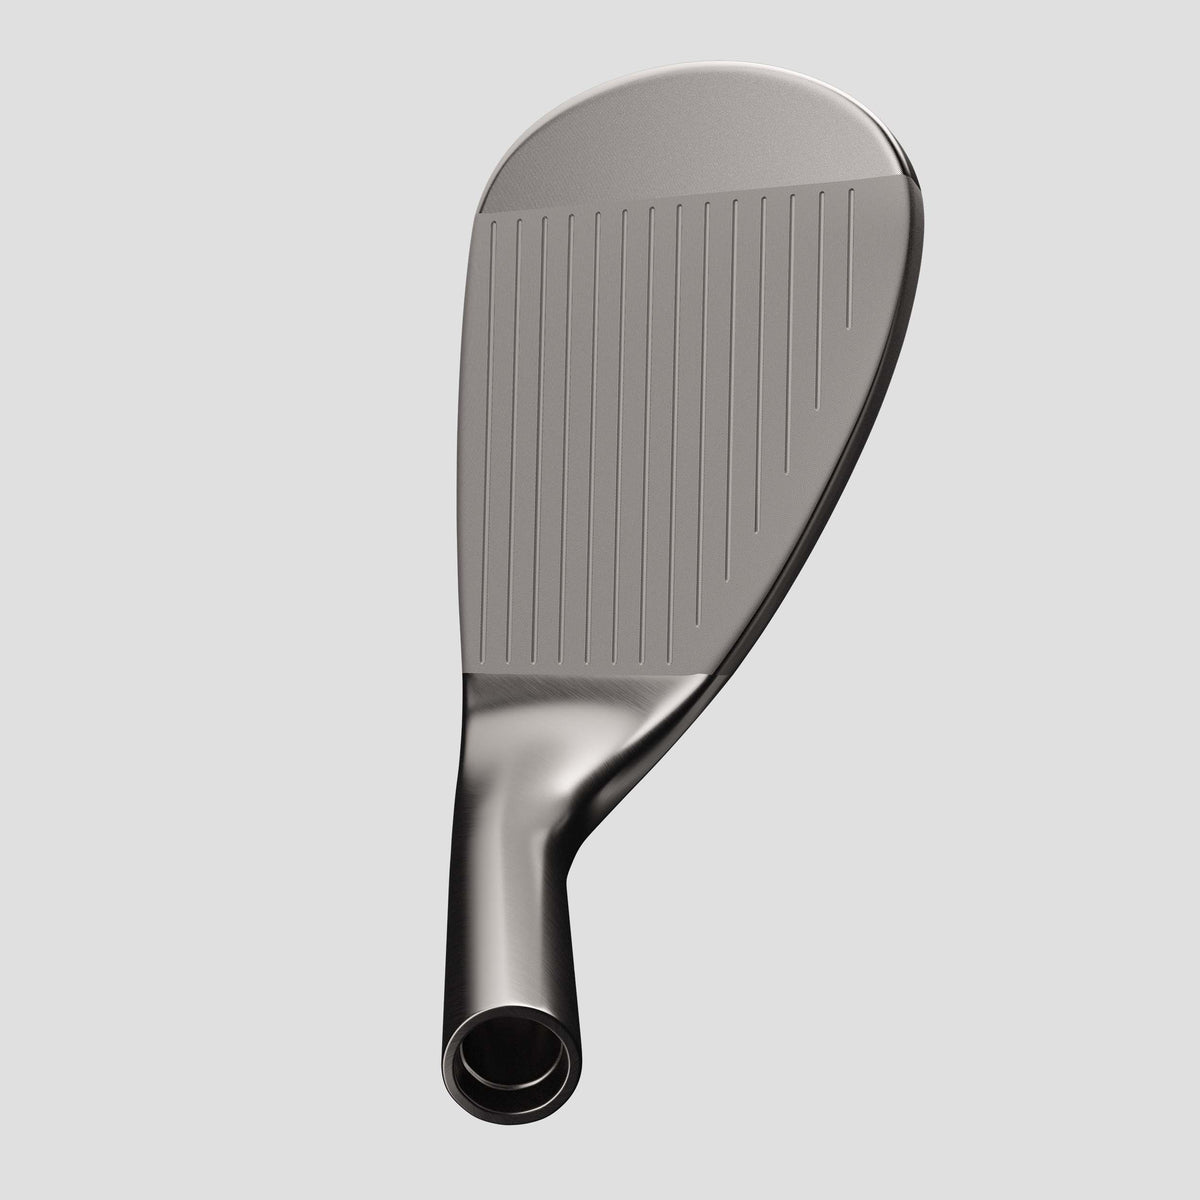 Edison Forged Wedge - Head Only